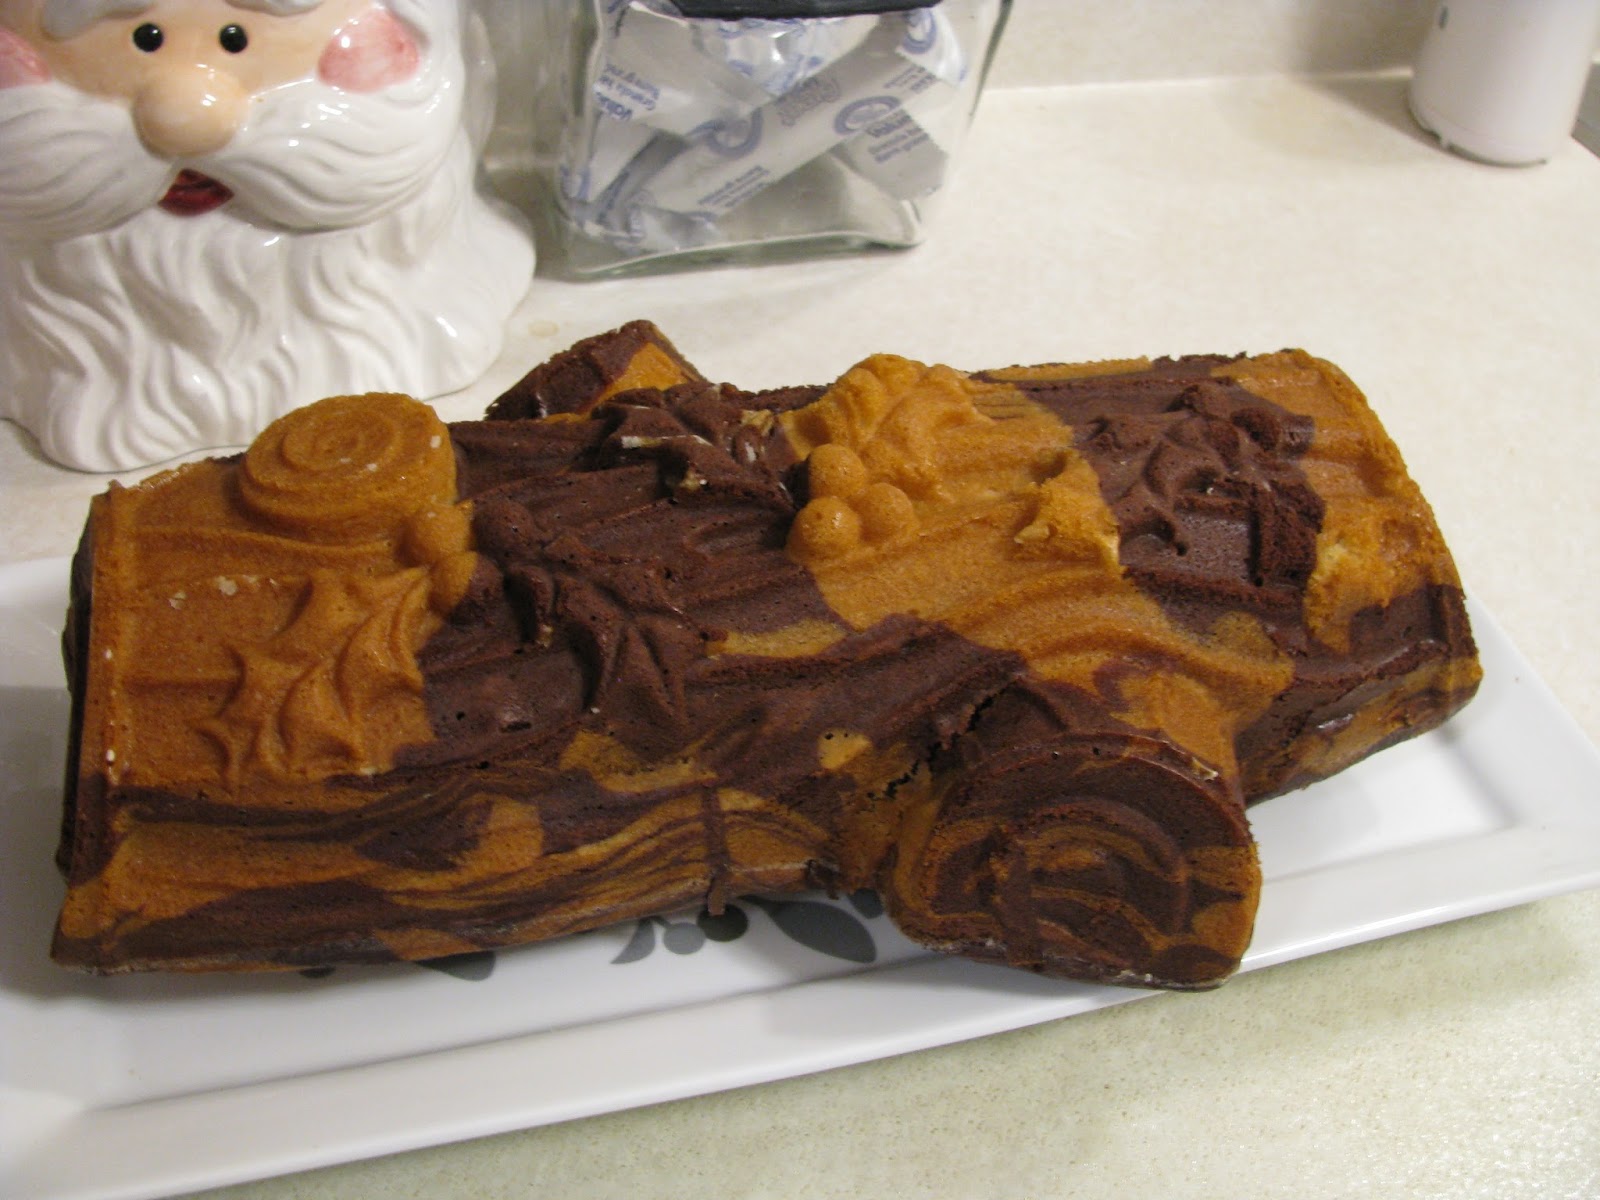 Warm Up The Holdays With A Winter Yule Log